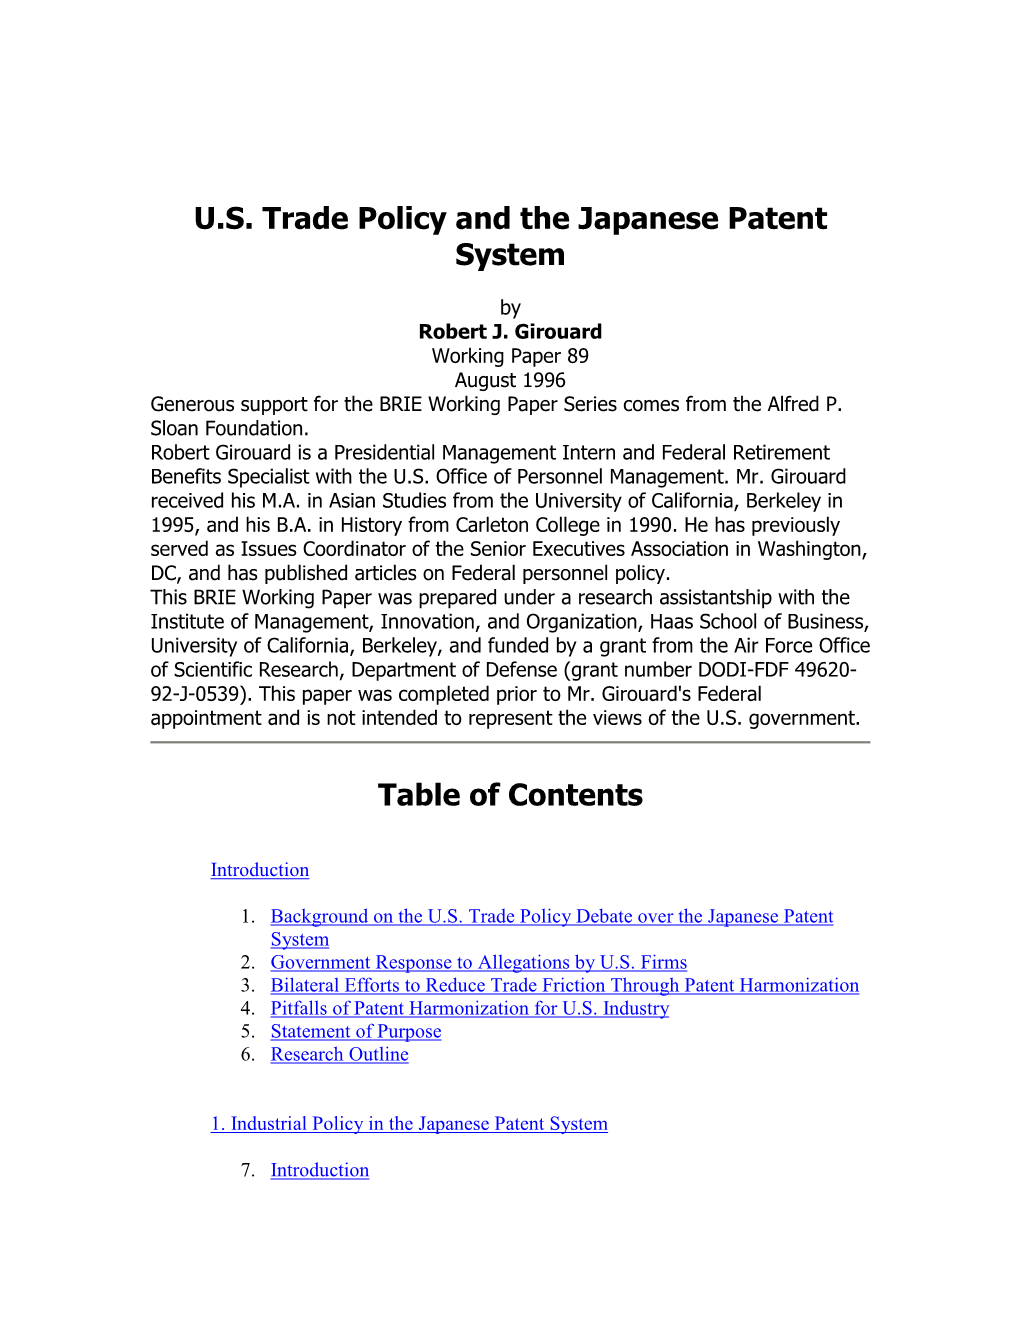 U.S. Trade Policy and the Japanese Patent System Table of Contents